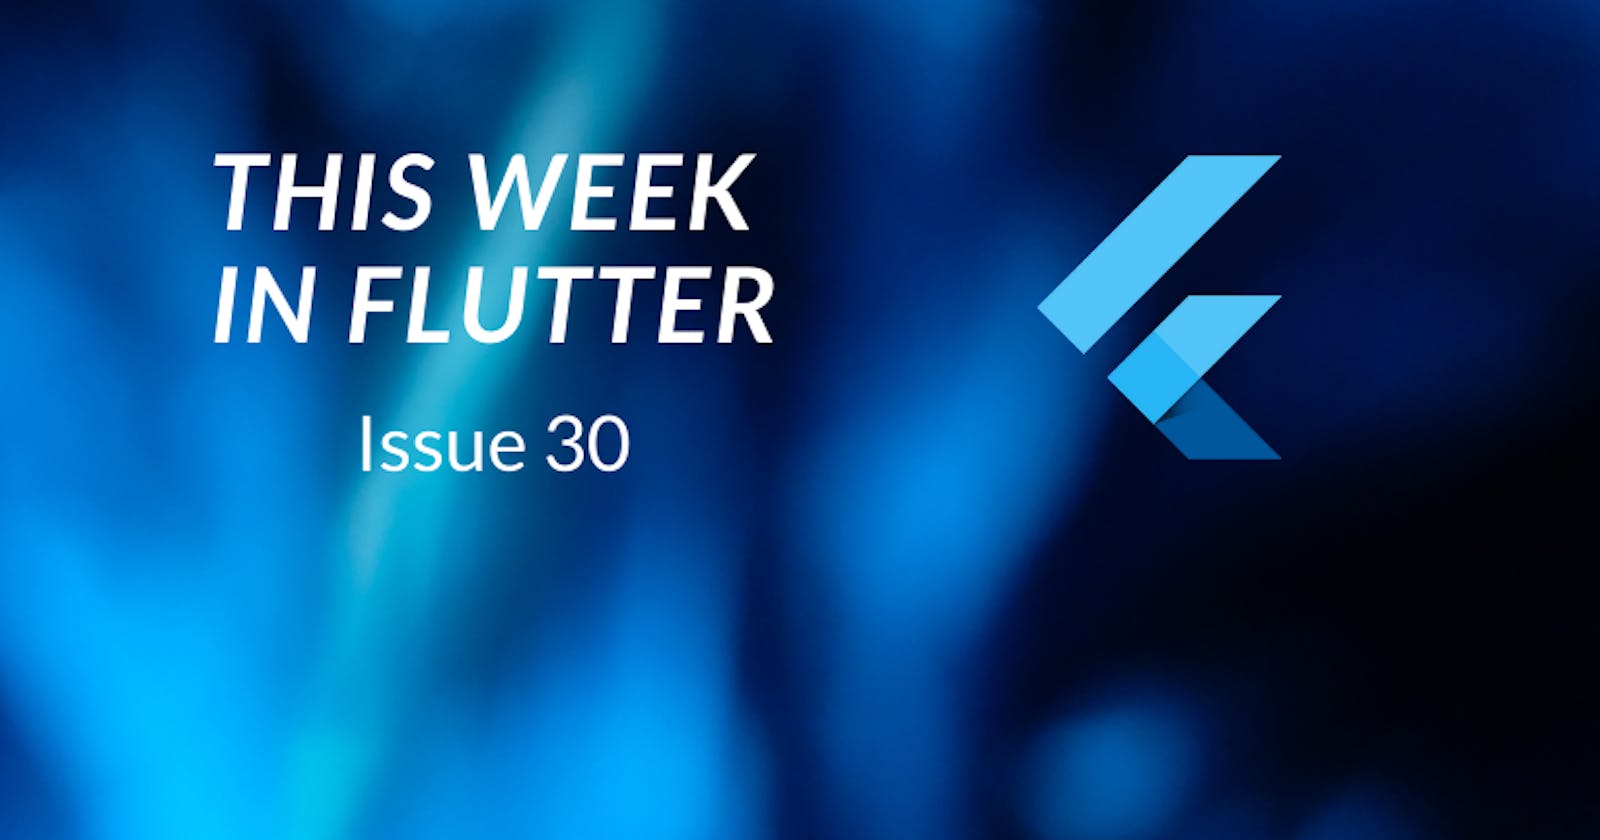 This week in Flutter #30